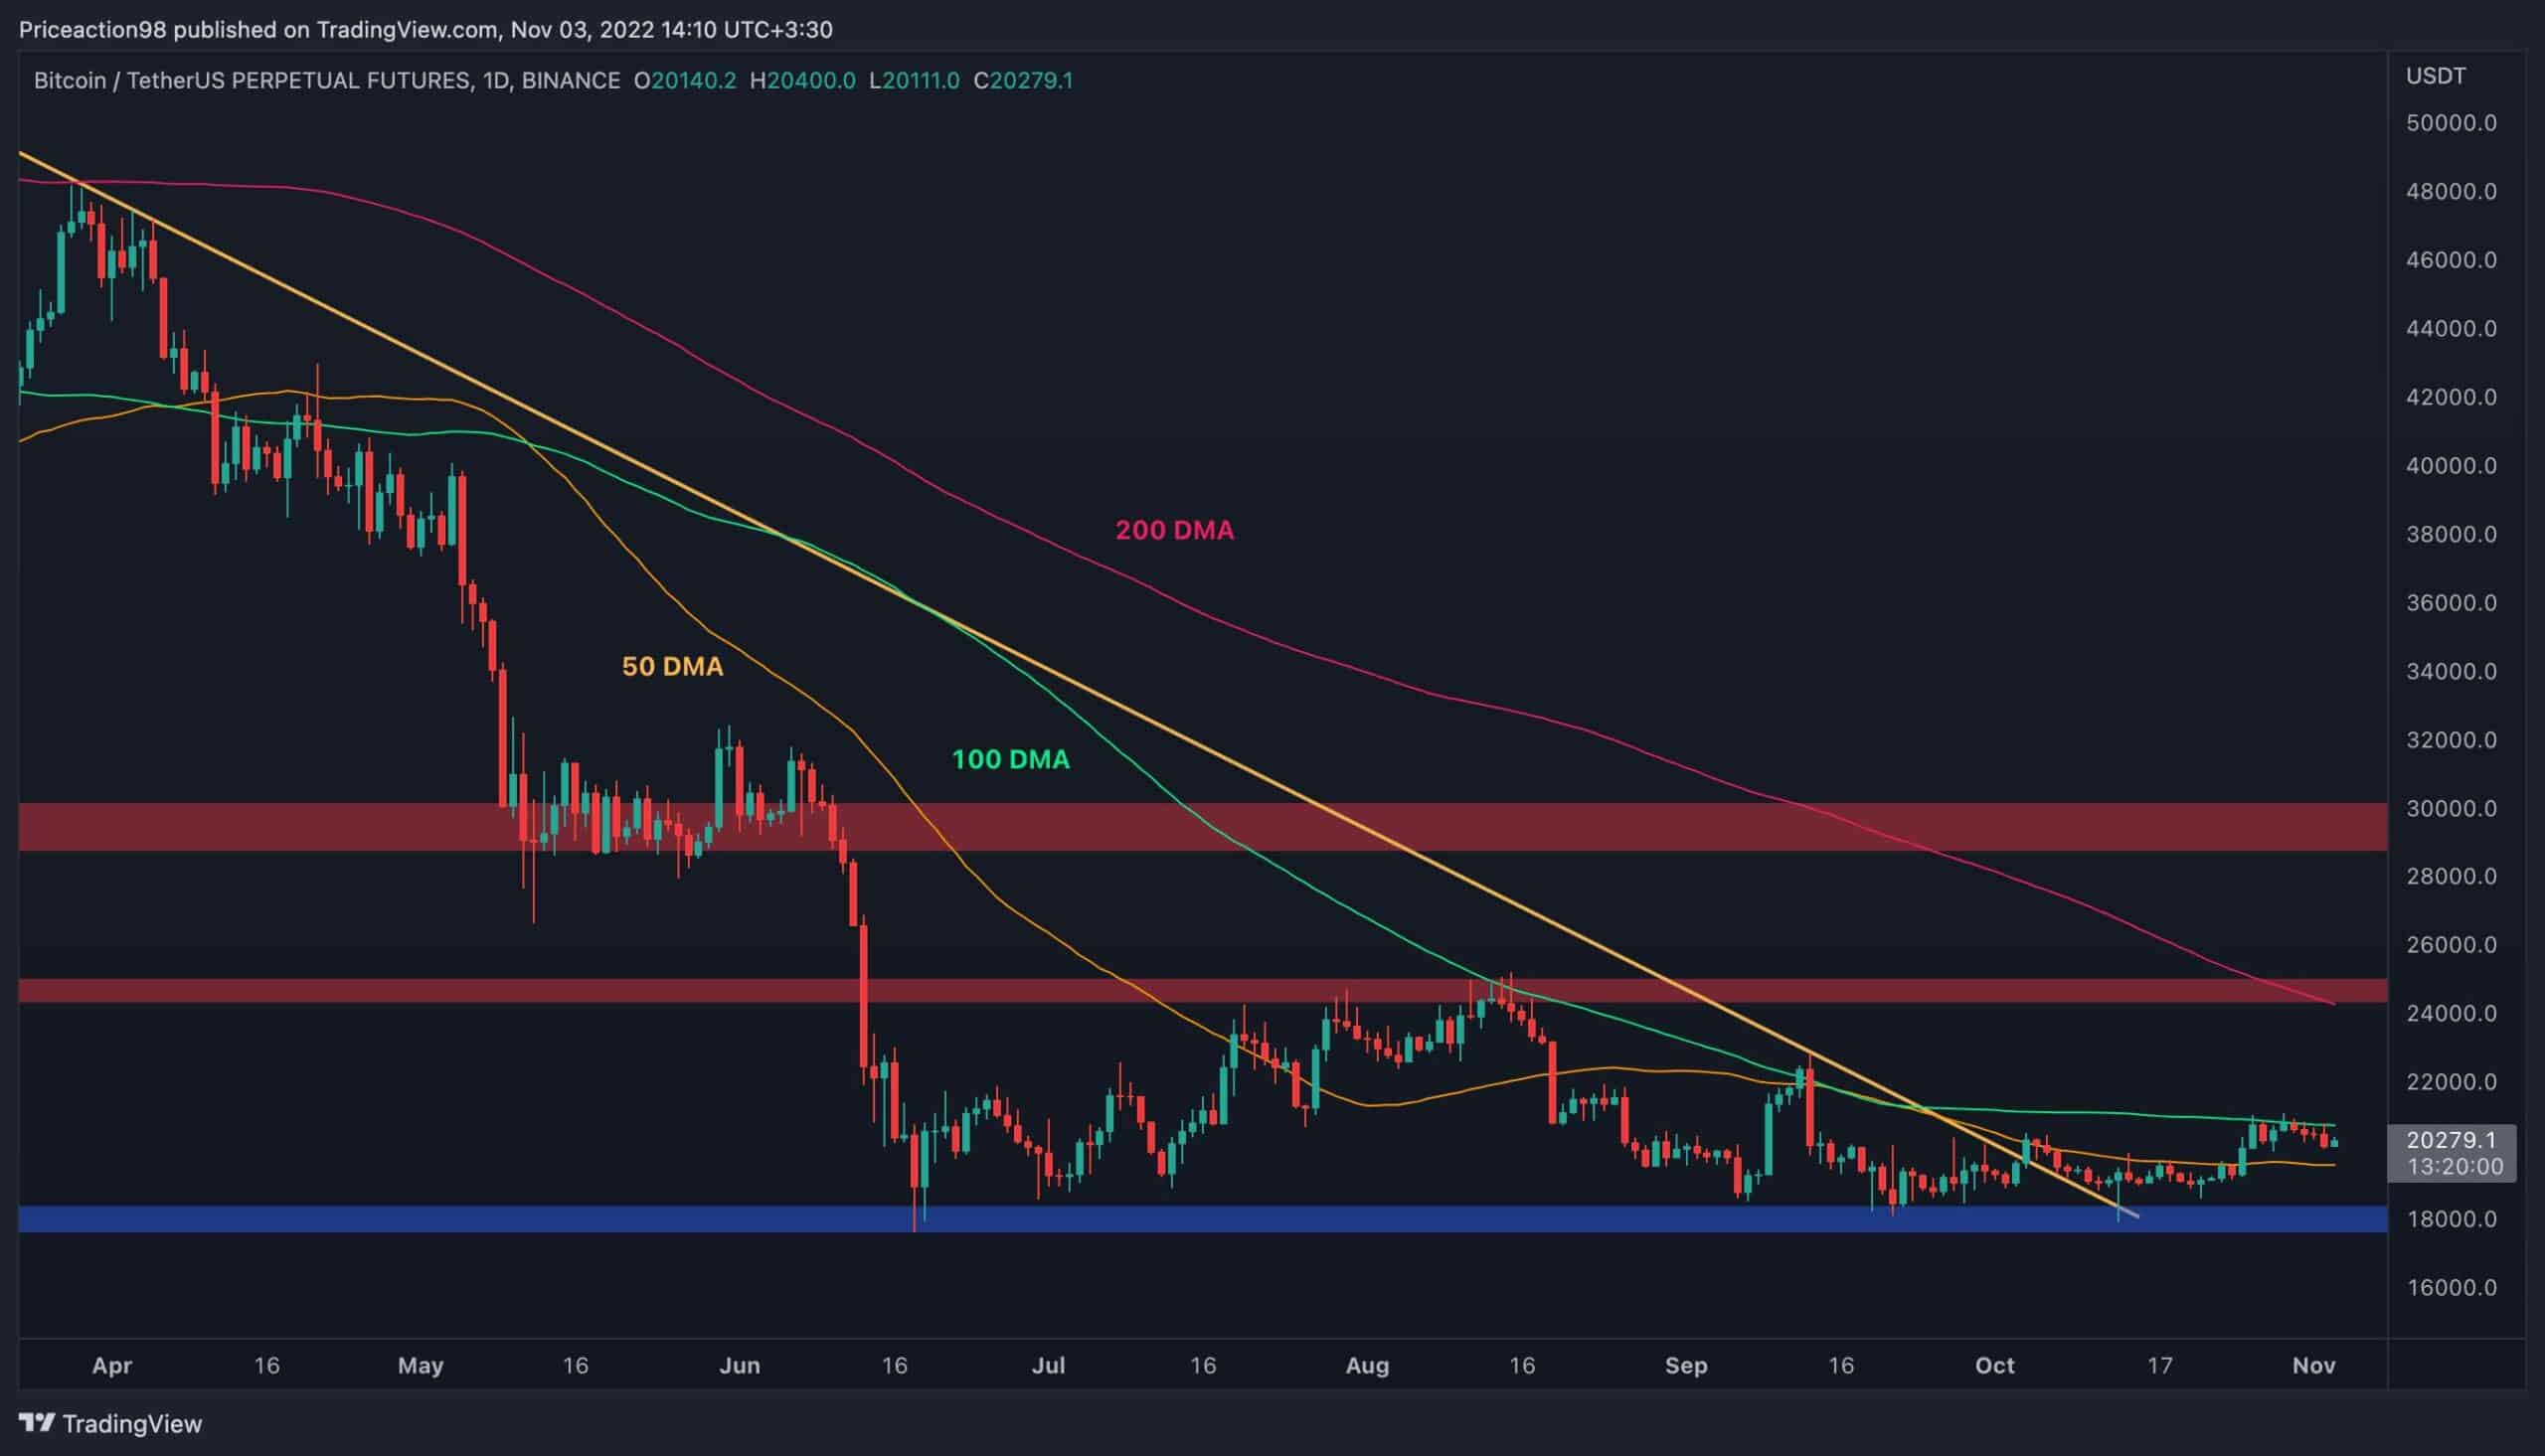 Recent-rally:-bull-trap-or-start-of-a-bull-wave-for-btc?-(bitcoin-price-analysis)